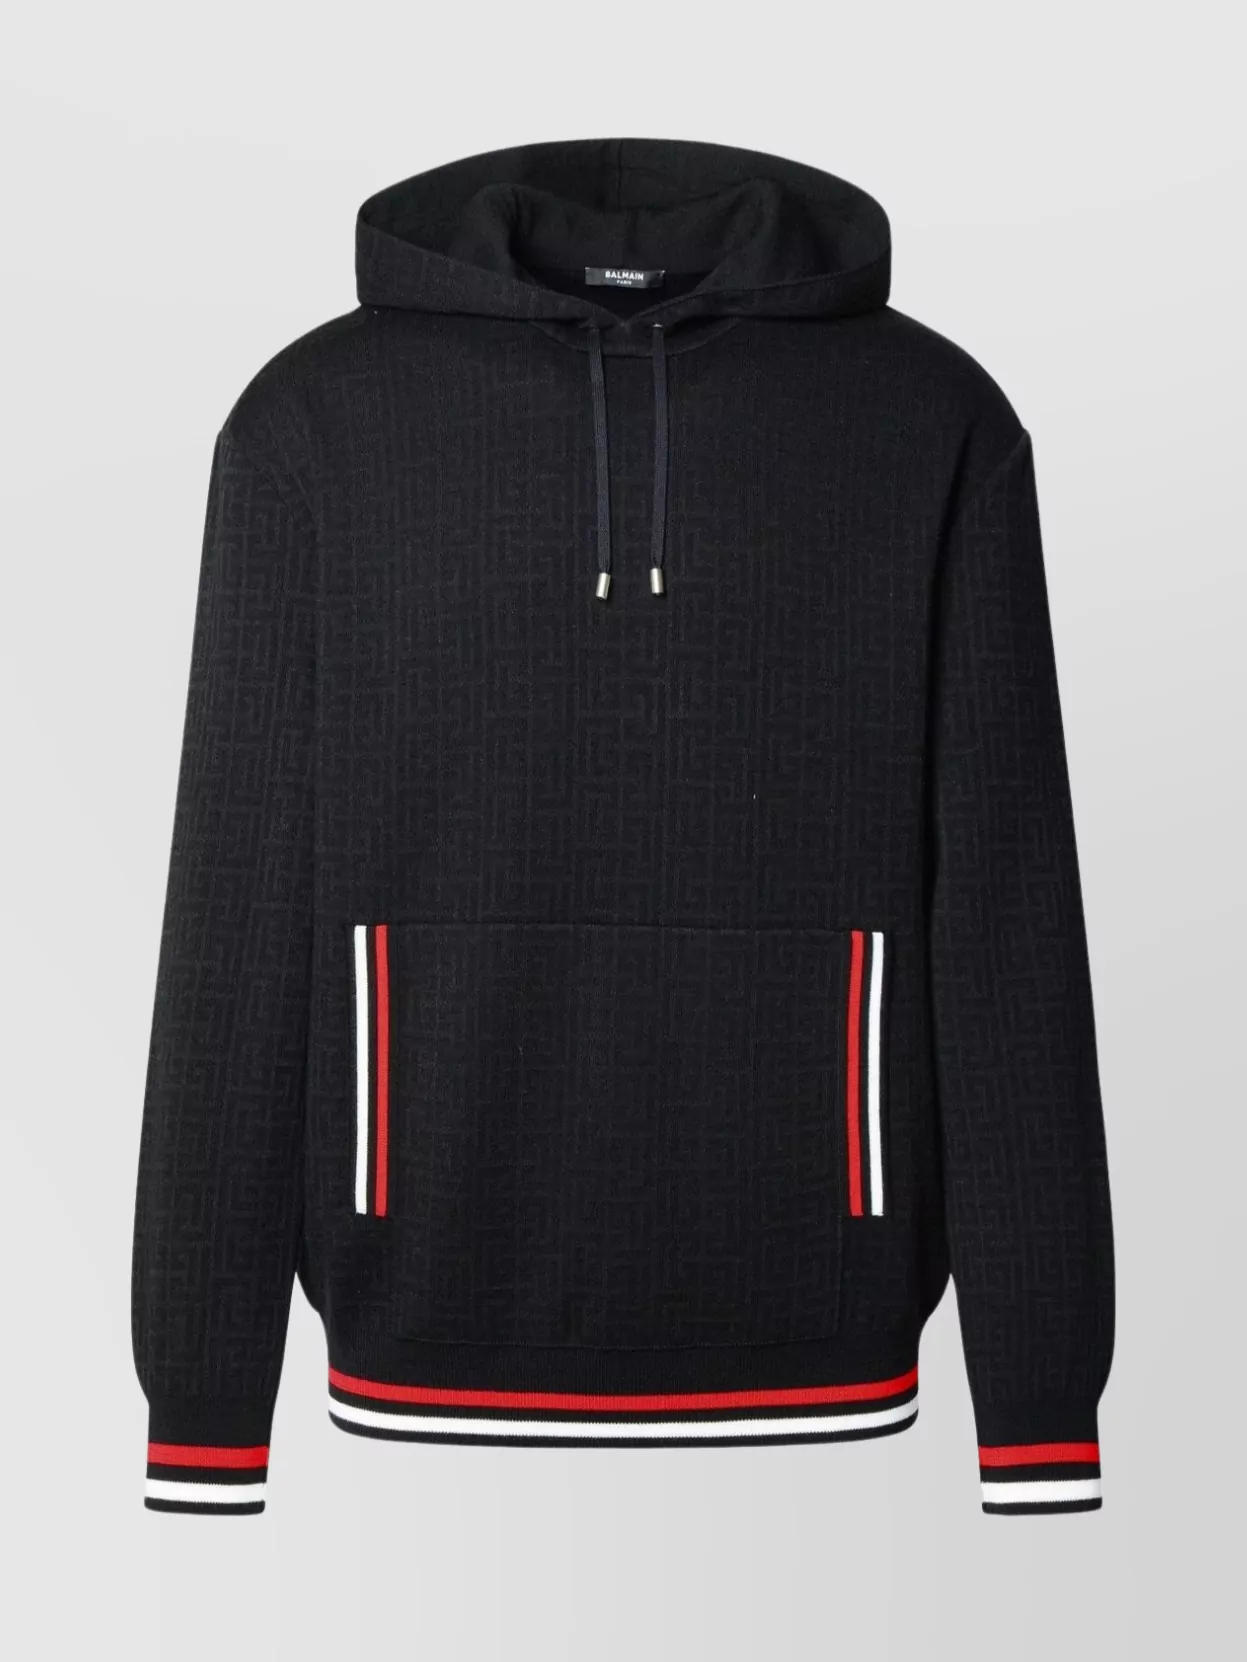 Balmain Wool Blend Hooded Sweater With Striped Detailing